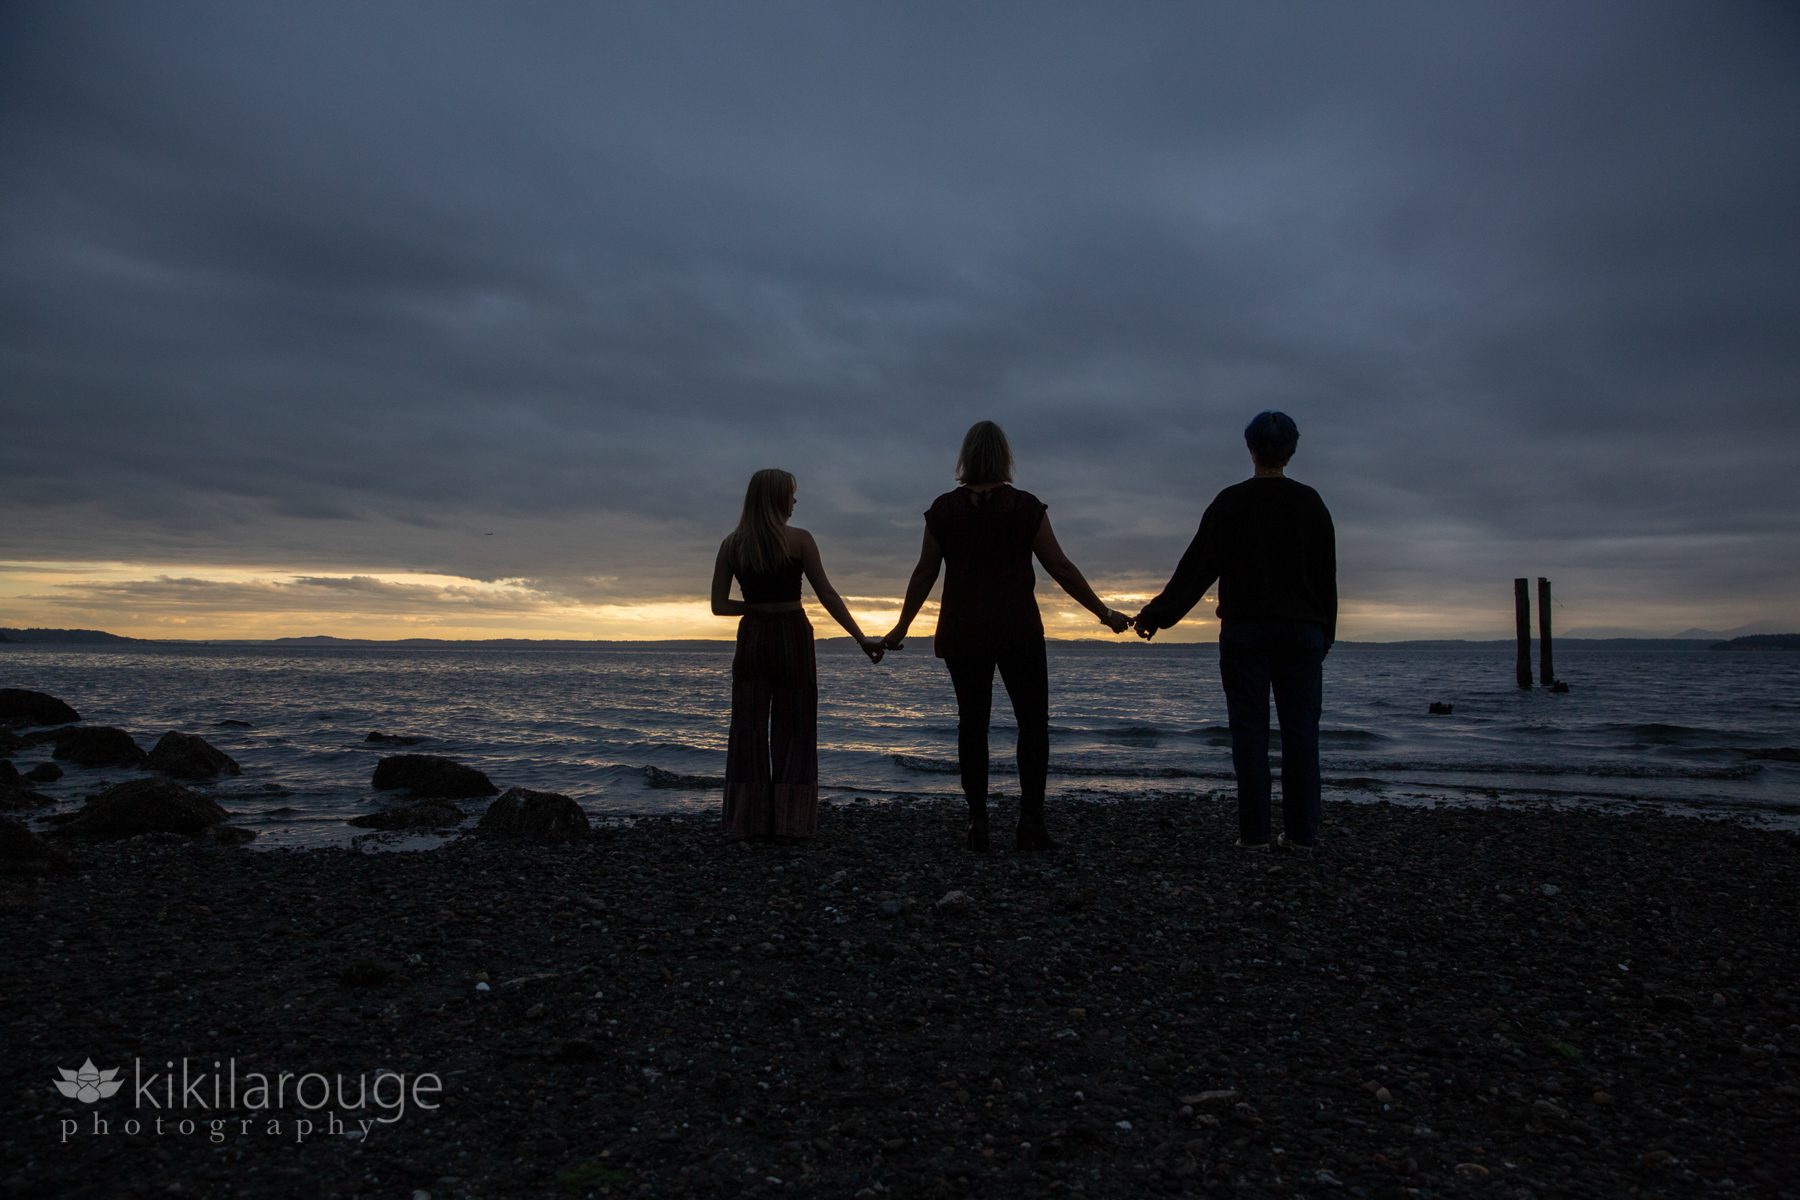 Mom with two teens in silhouette at stormy sunset beach